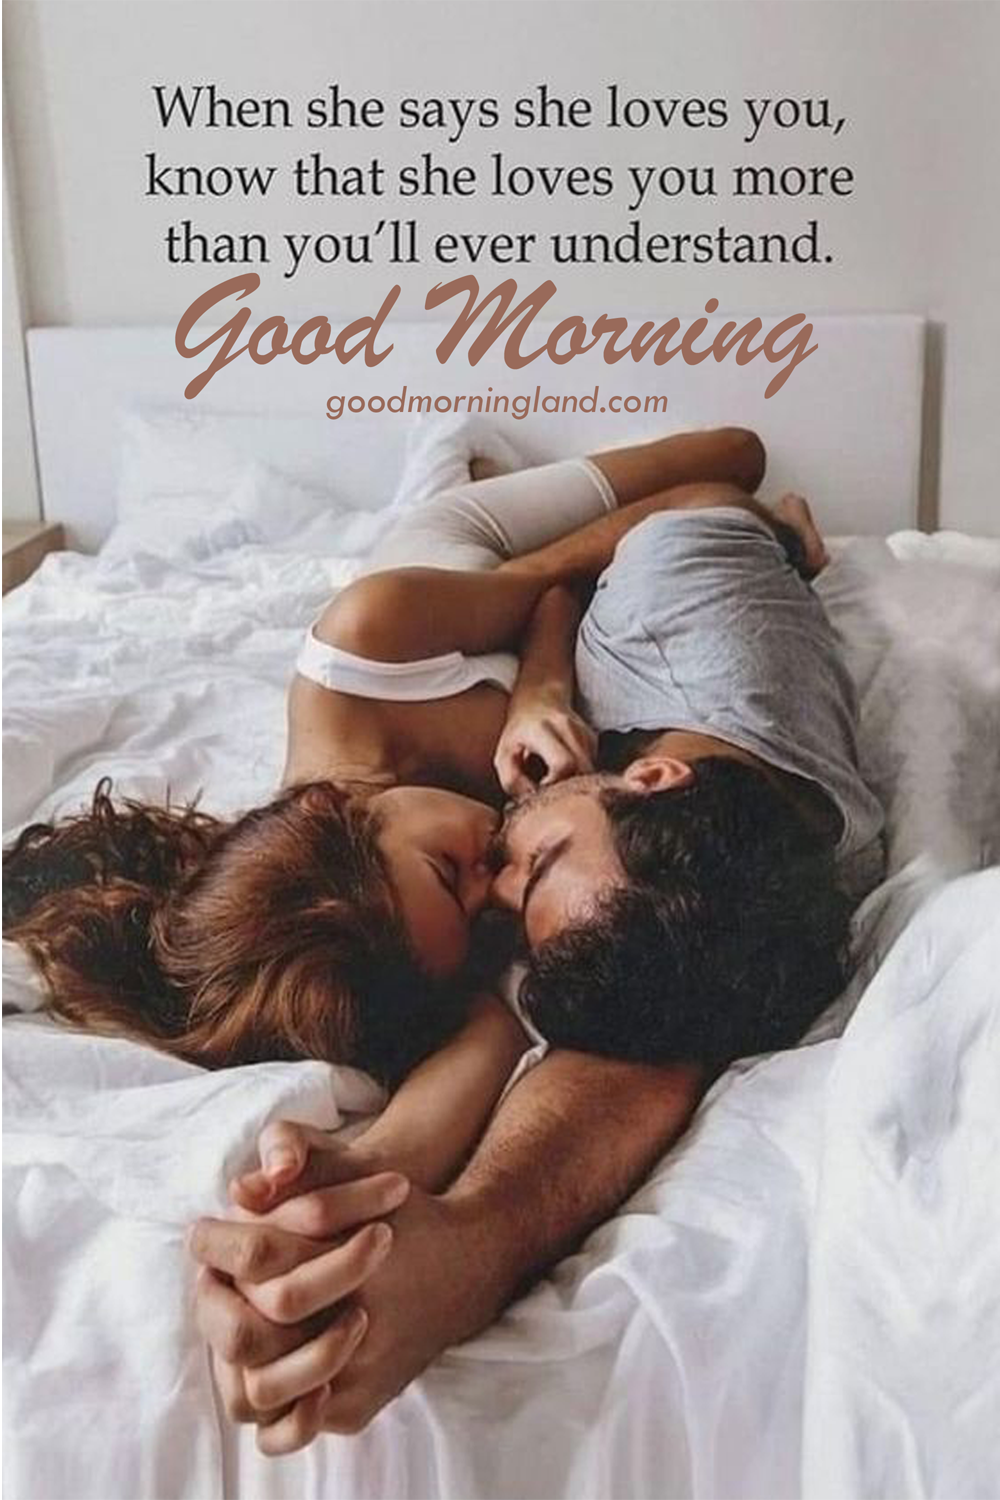 Good Morning Pictures Kiss And Hold Hands love And Romance - Good ...